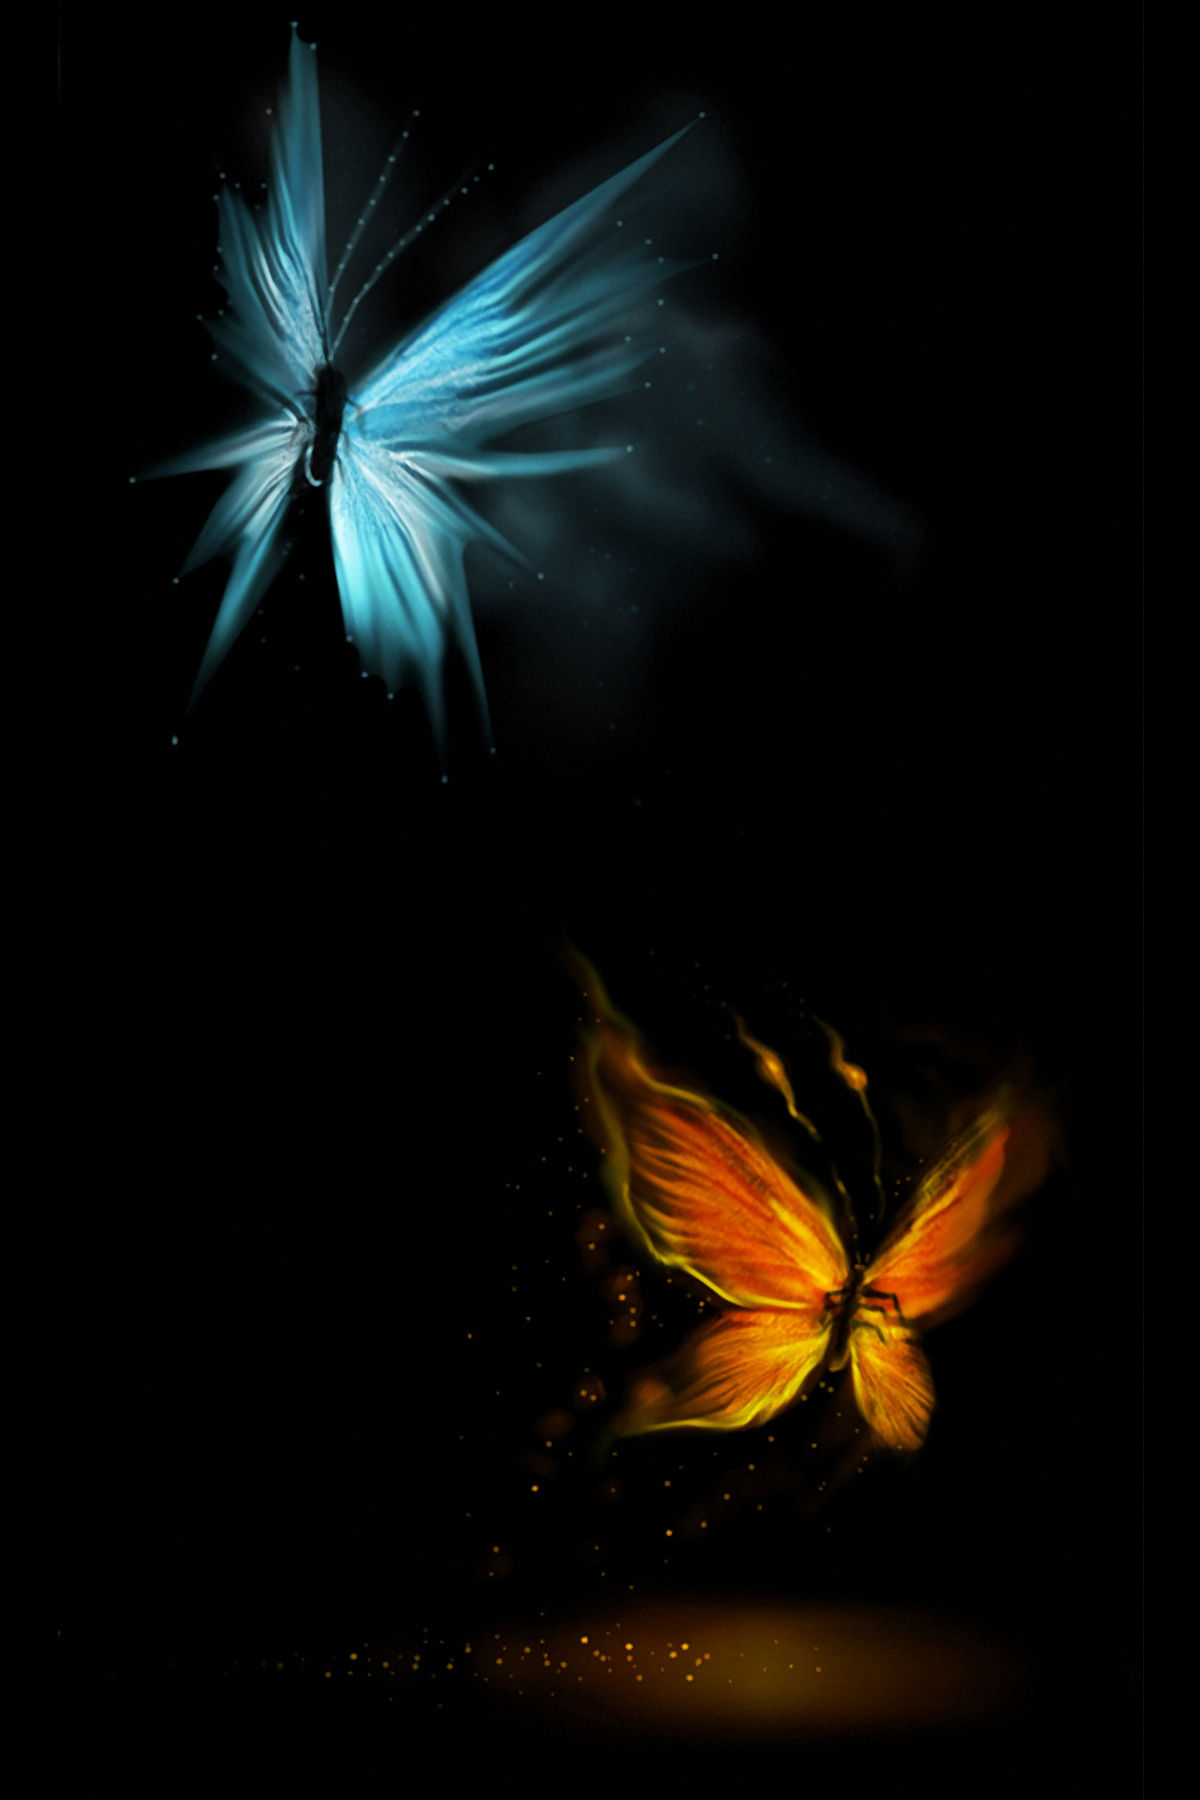 Butterfly Wallpaper For Android Free Animated Images - Classic Wallpaper Hd For Mobile - HD Wallpaper 